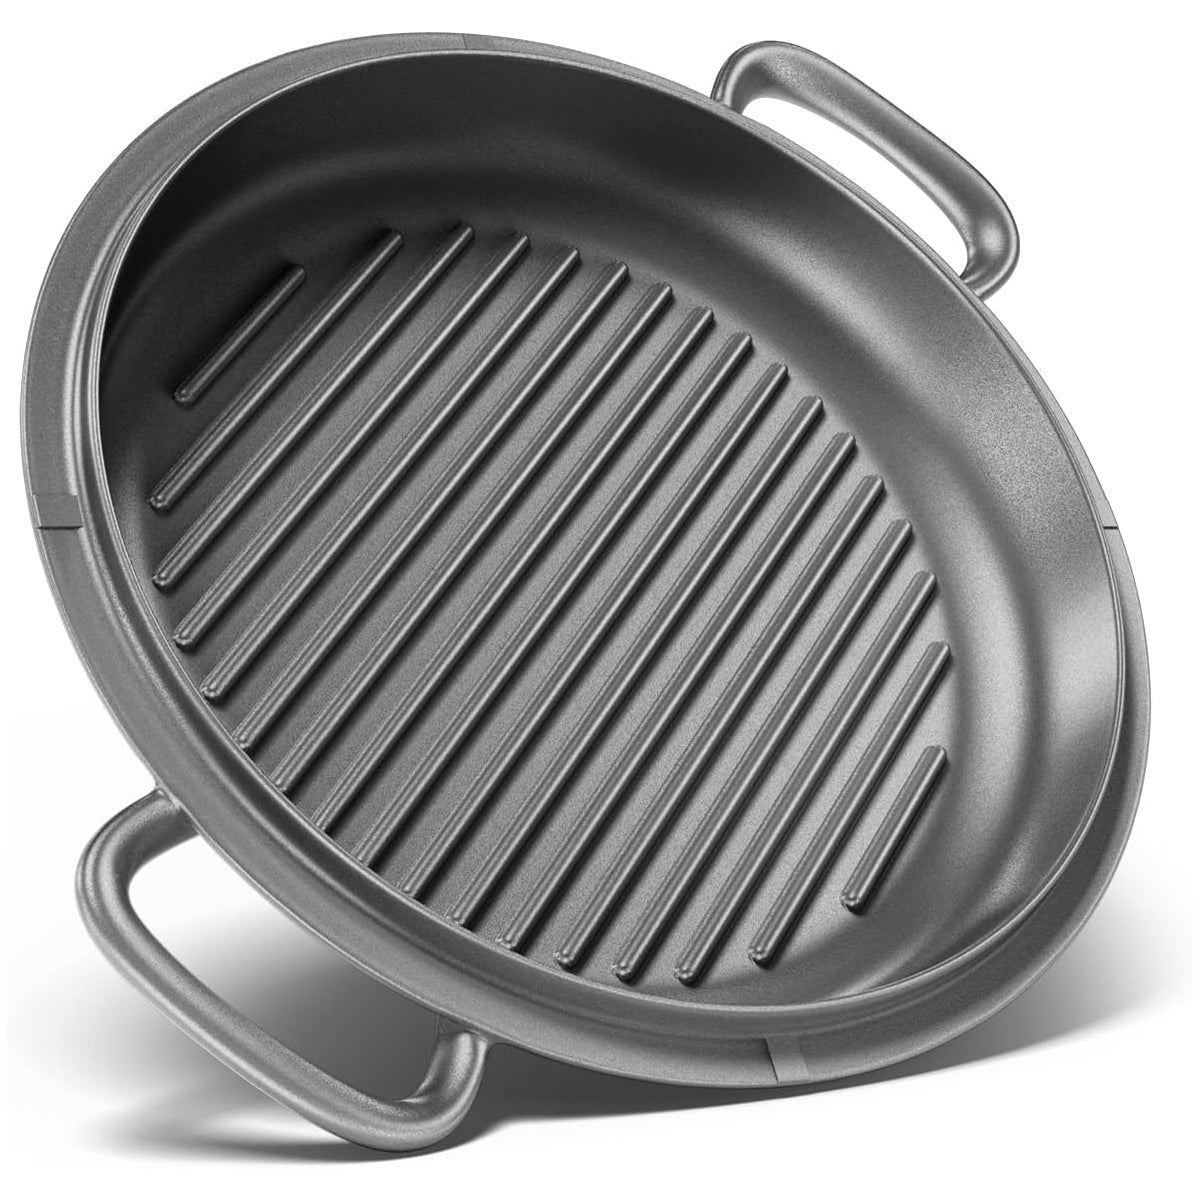 Tag says ceramic-coated cast aluminum, safe for stove but NOT oven. Is it  safe in the oven without the lid? : r/cookware